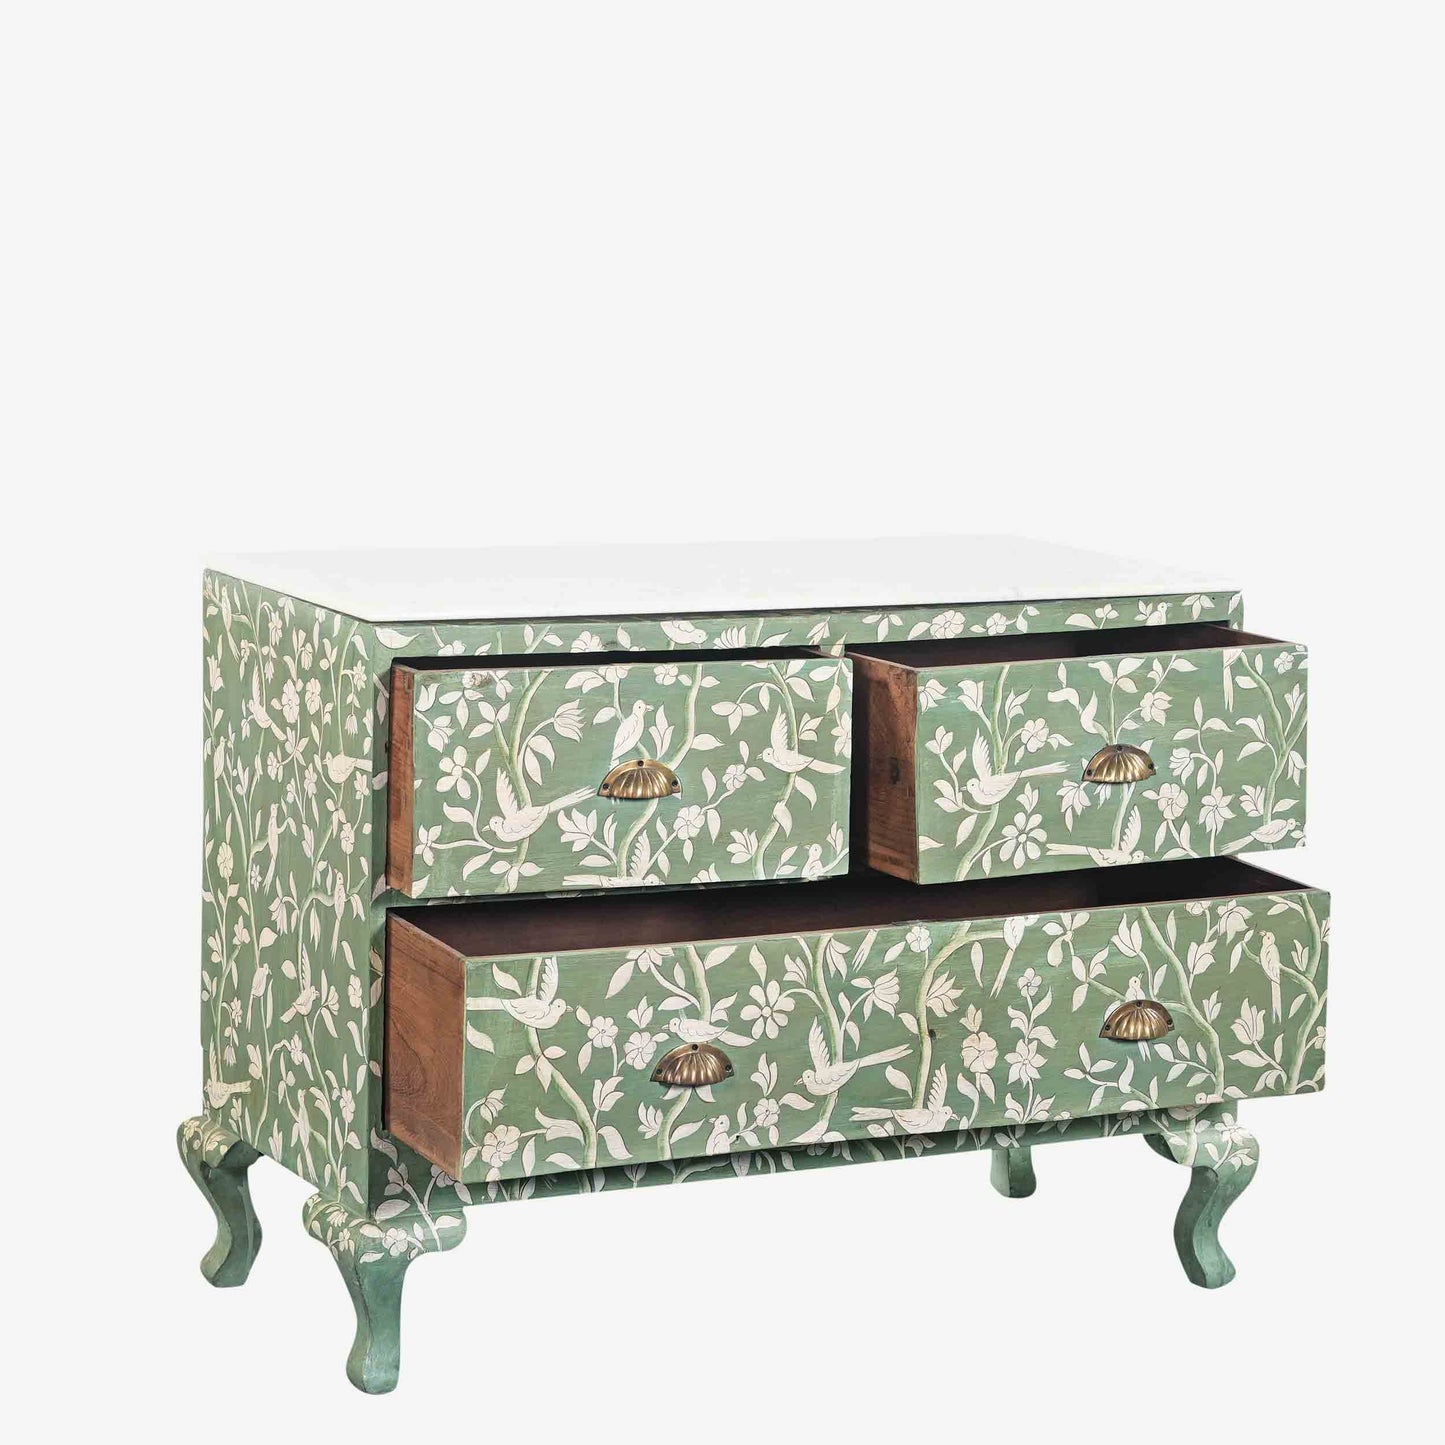 The Birdie Hand Painted Antique Chest of Drawers with Marble